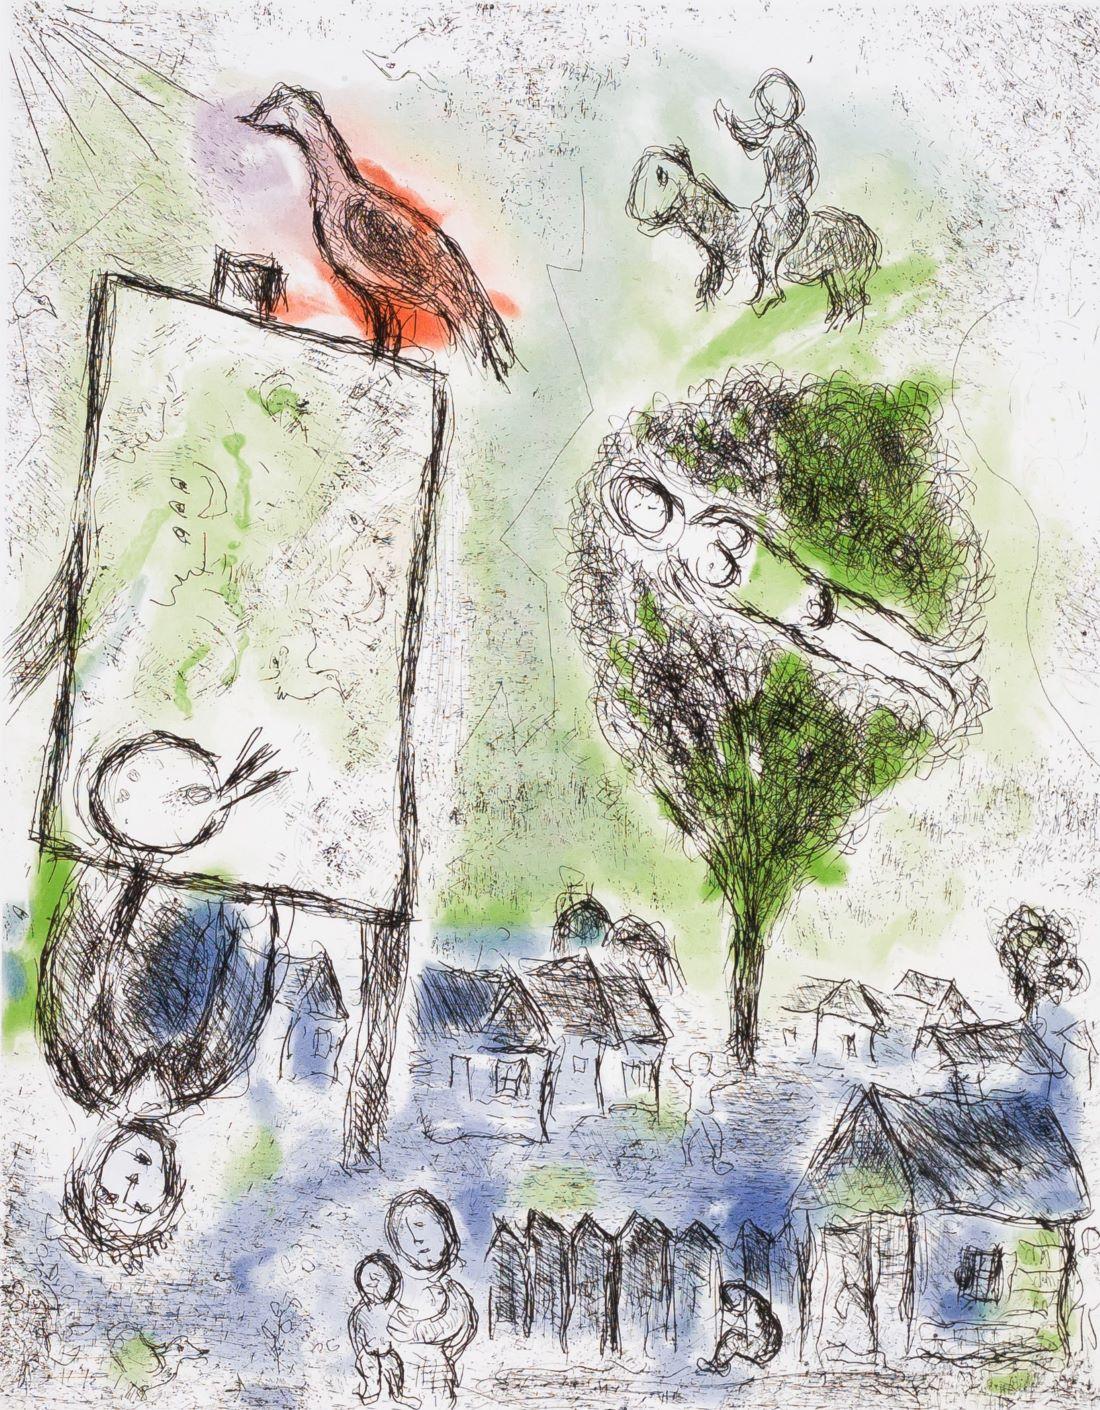 Inspiration, 1981 (Les Songes #8) - Print by Marc Chagall